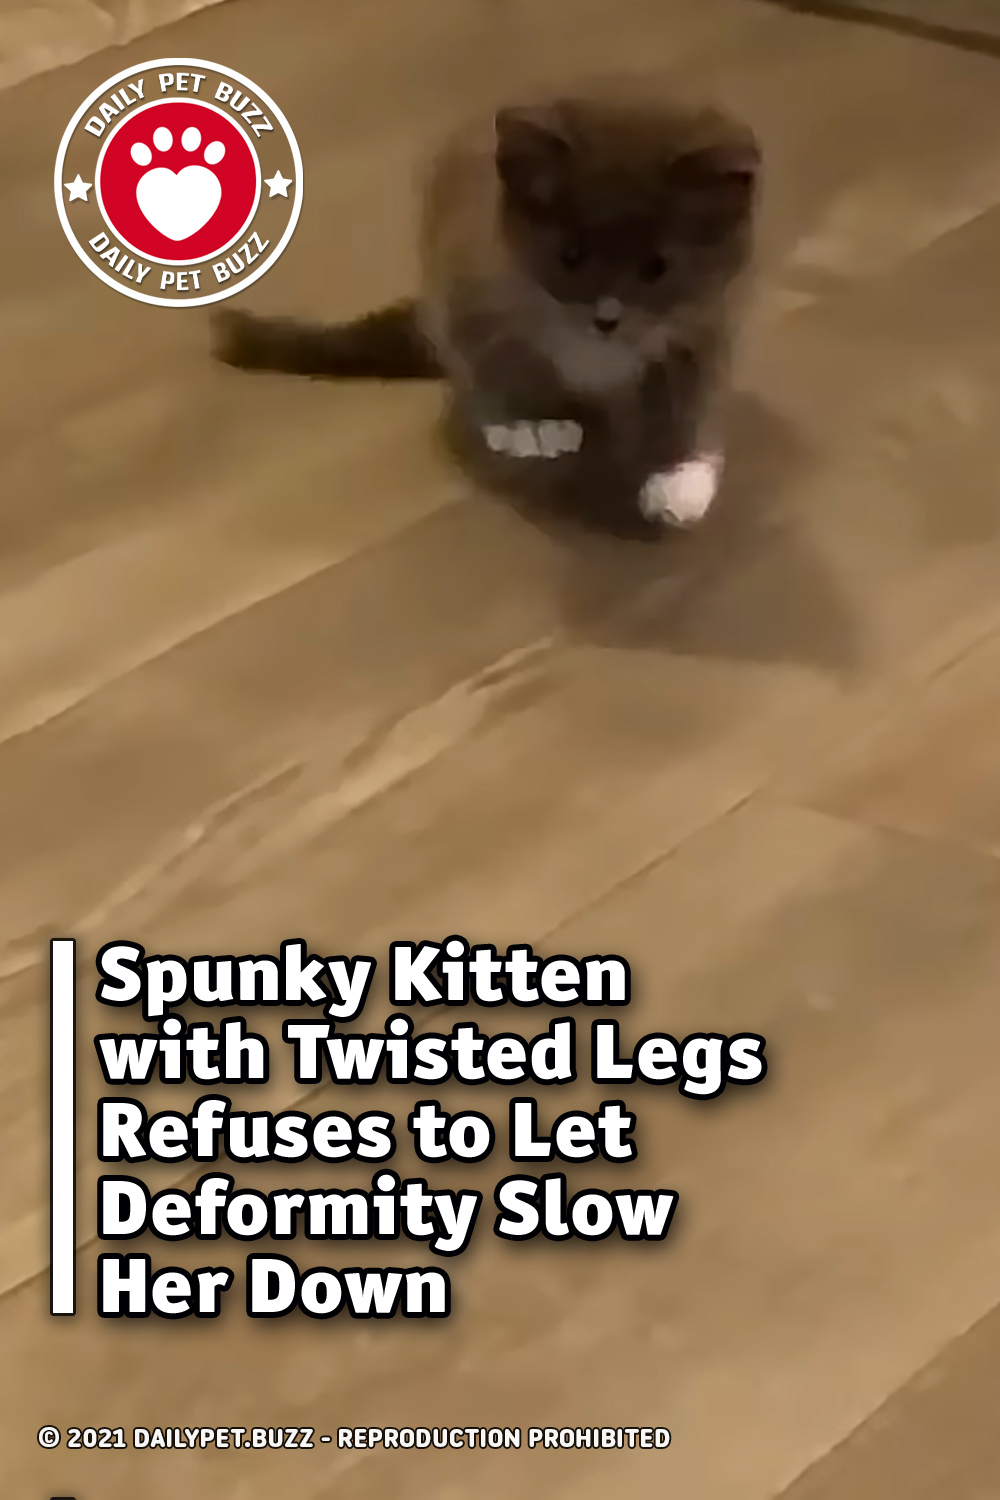 Spunky Kitten with Twisted Legs Refuses to Let Deformity Slow Her Down